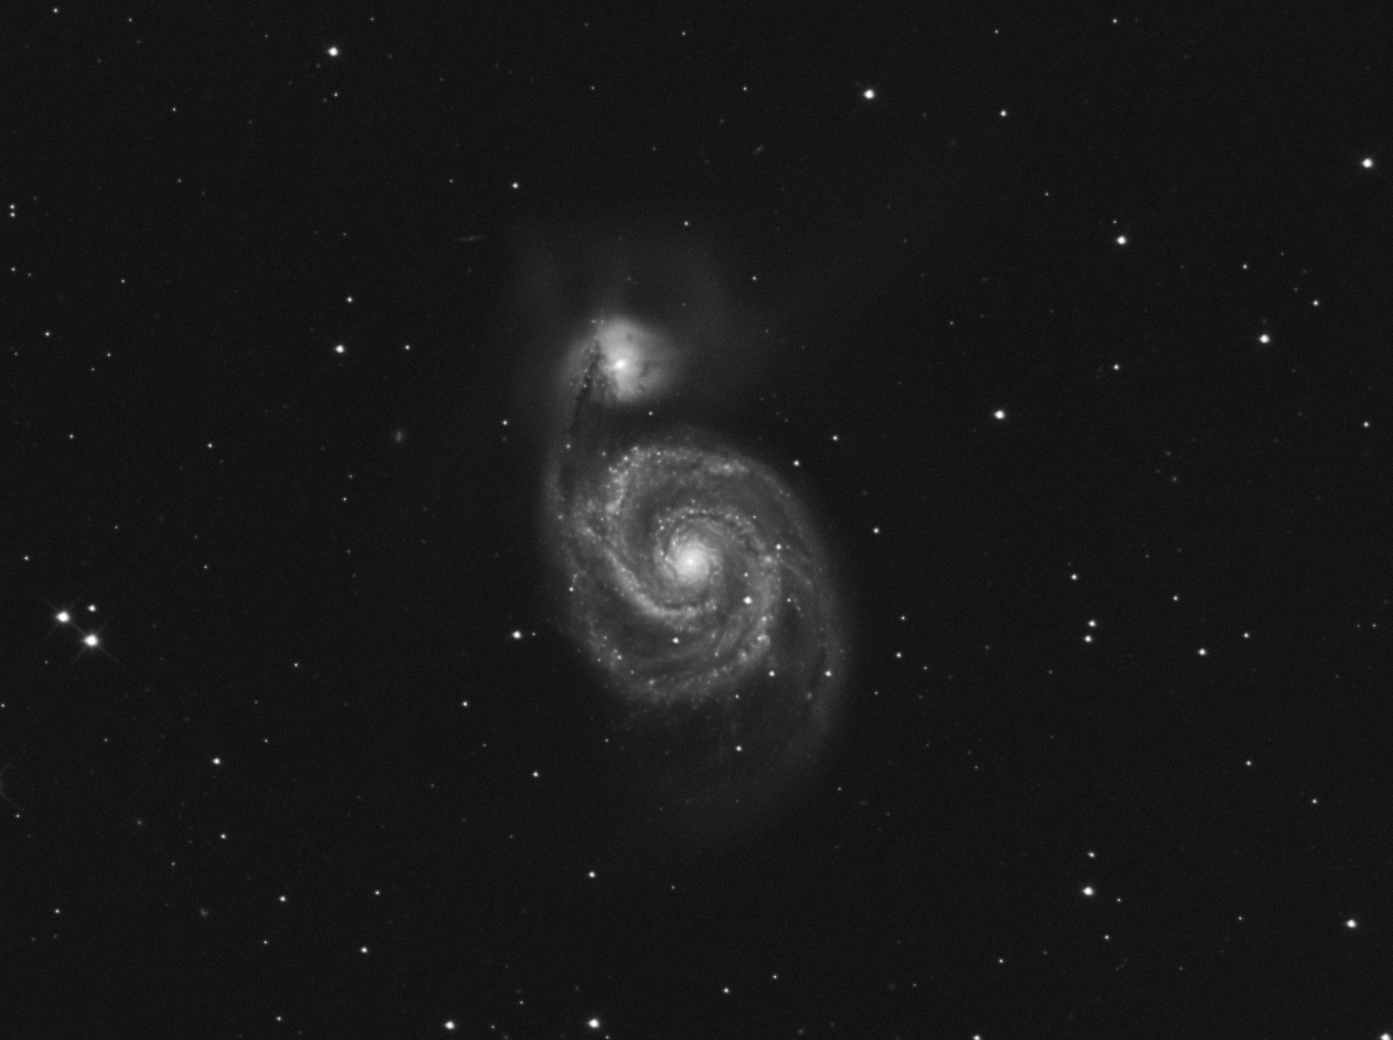 5adf82aa072c6_Messier51crop.png.e08c728dbff099b1bd60a95a9b80e8b3.png